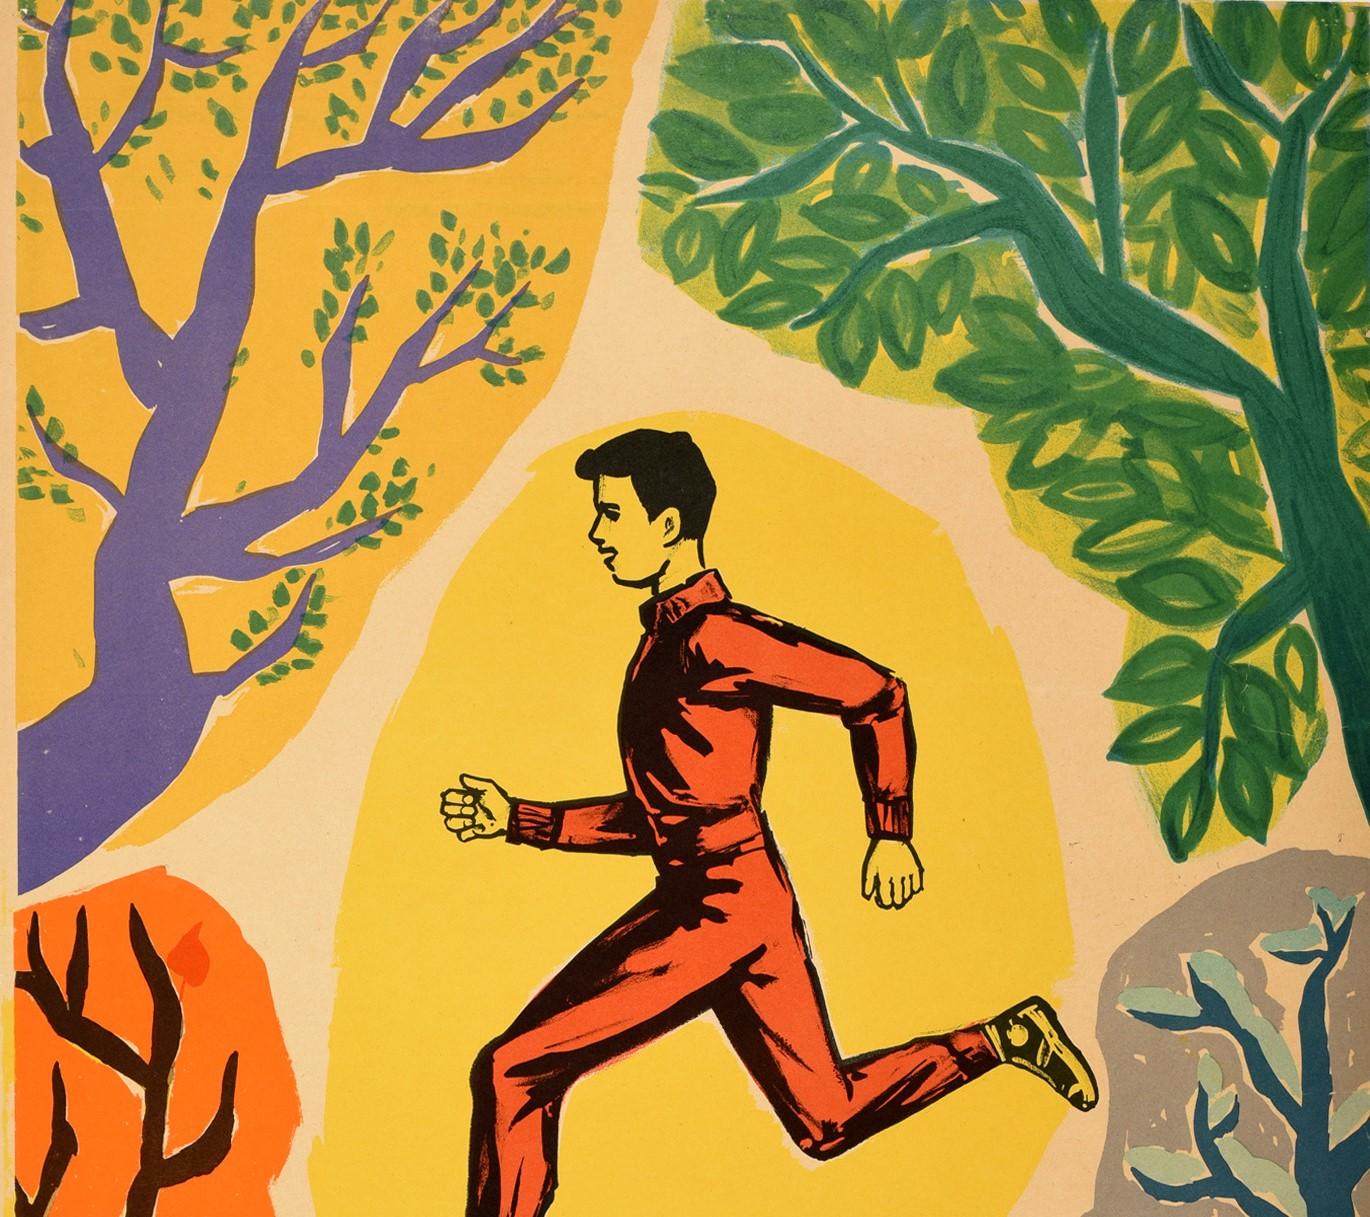 Original vintage sport and health propaganda poster - Train All Year Round / Trenuj Caly Rok - featuring a man keeping fit by running in the woods surrounded by the trees in the different seasons with a few green leaves for Spring and completely